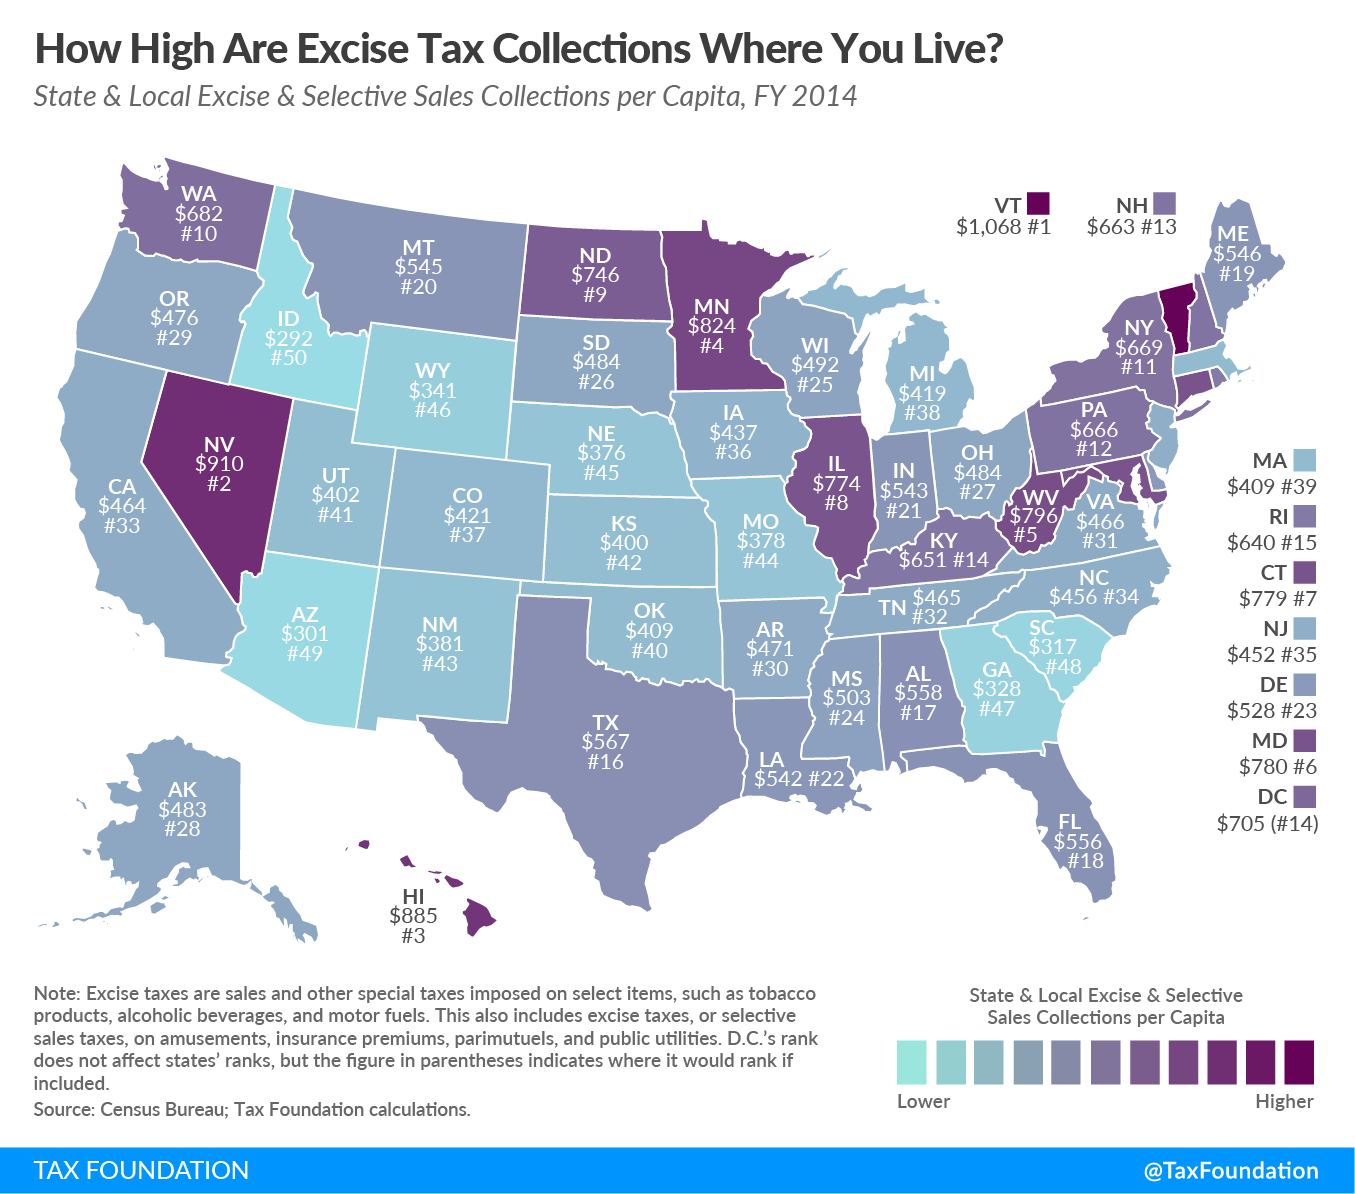 State & Local Excise Tax Collections per Capita